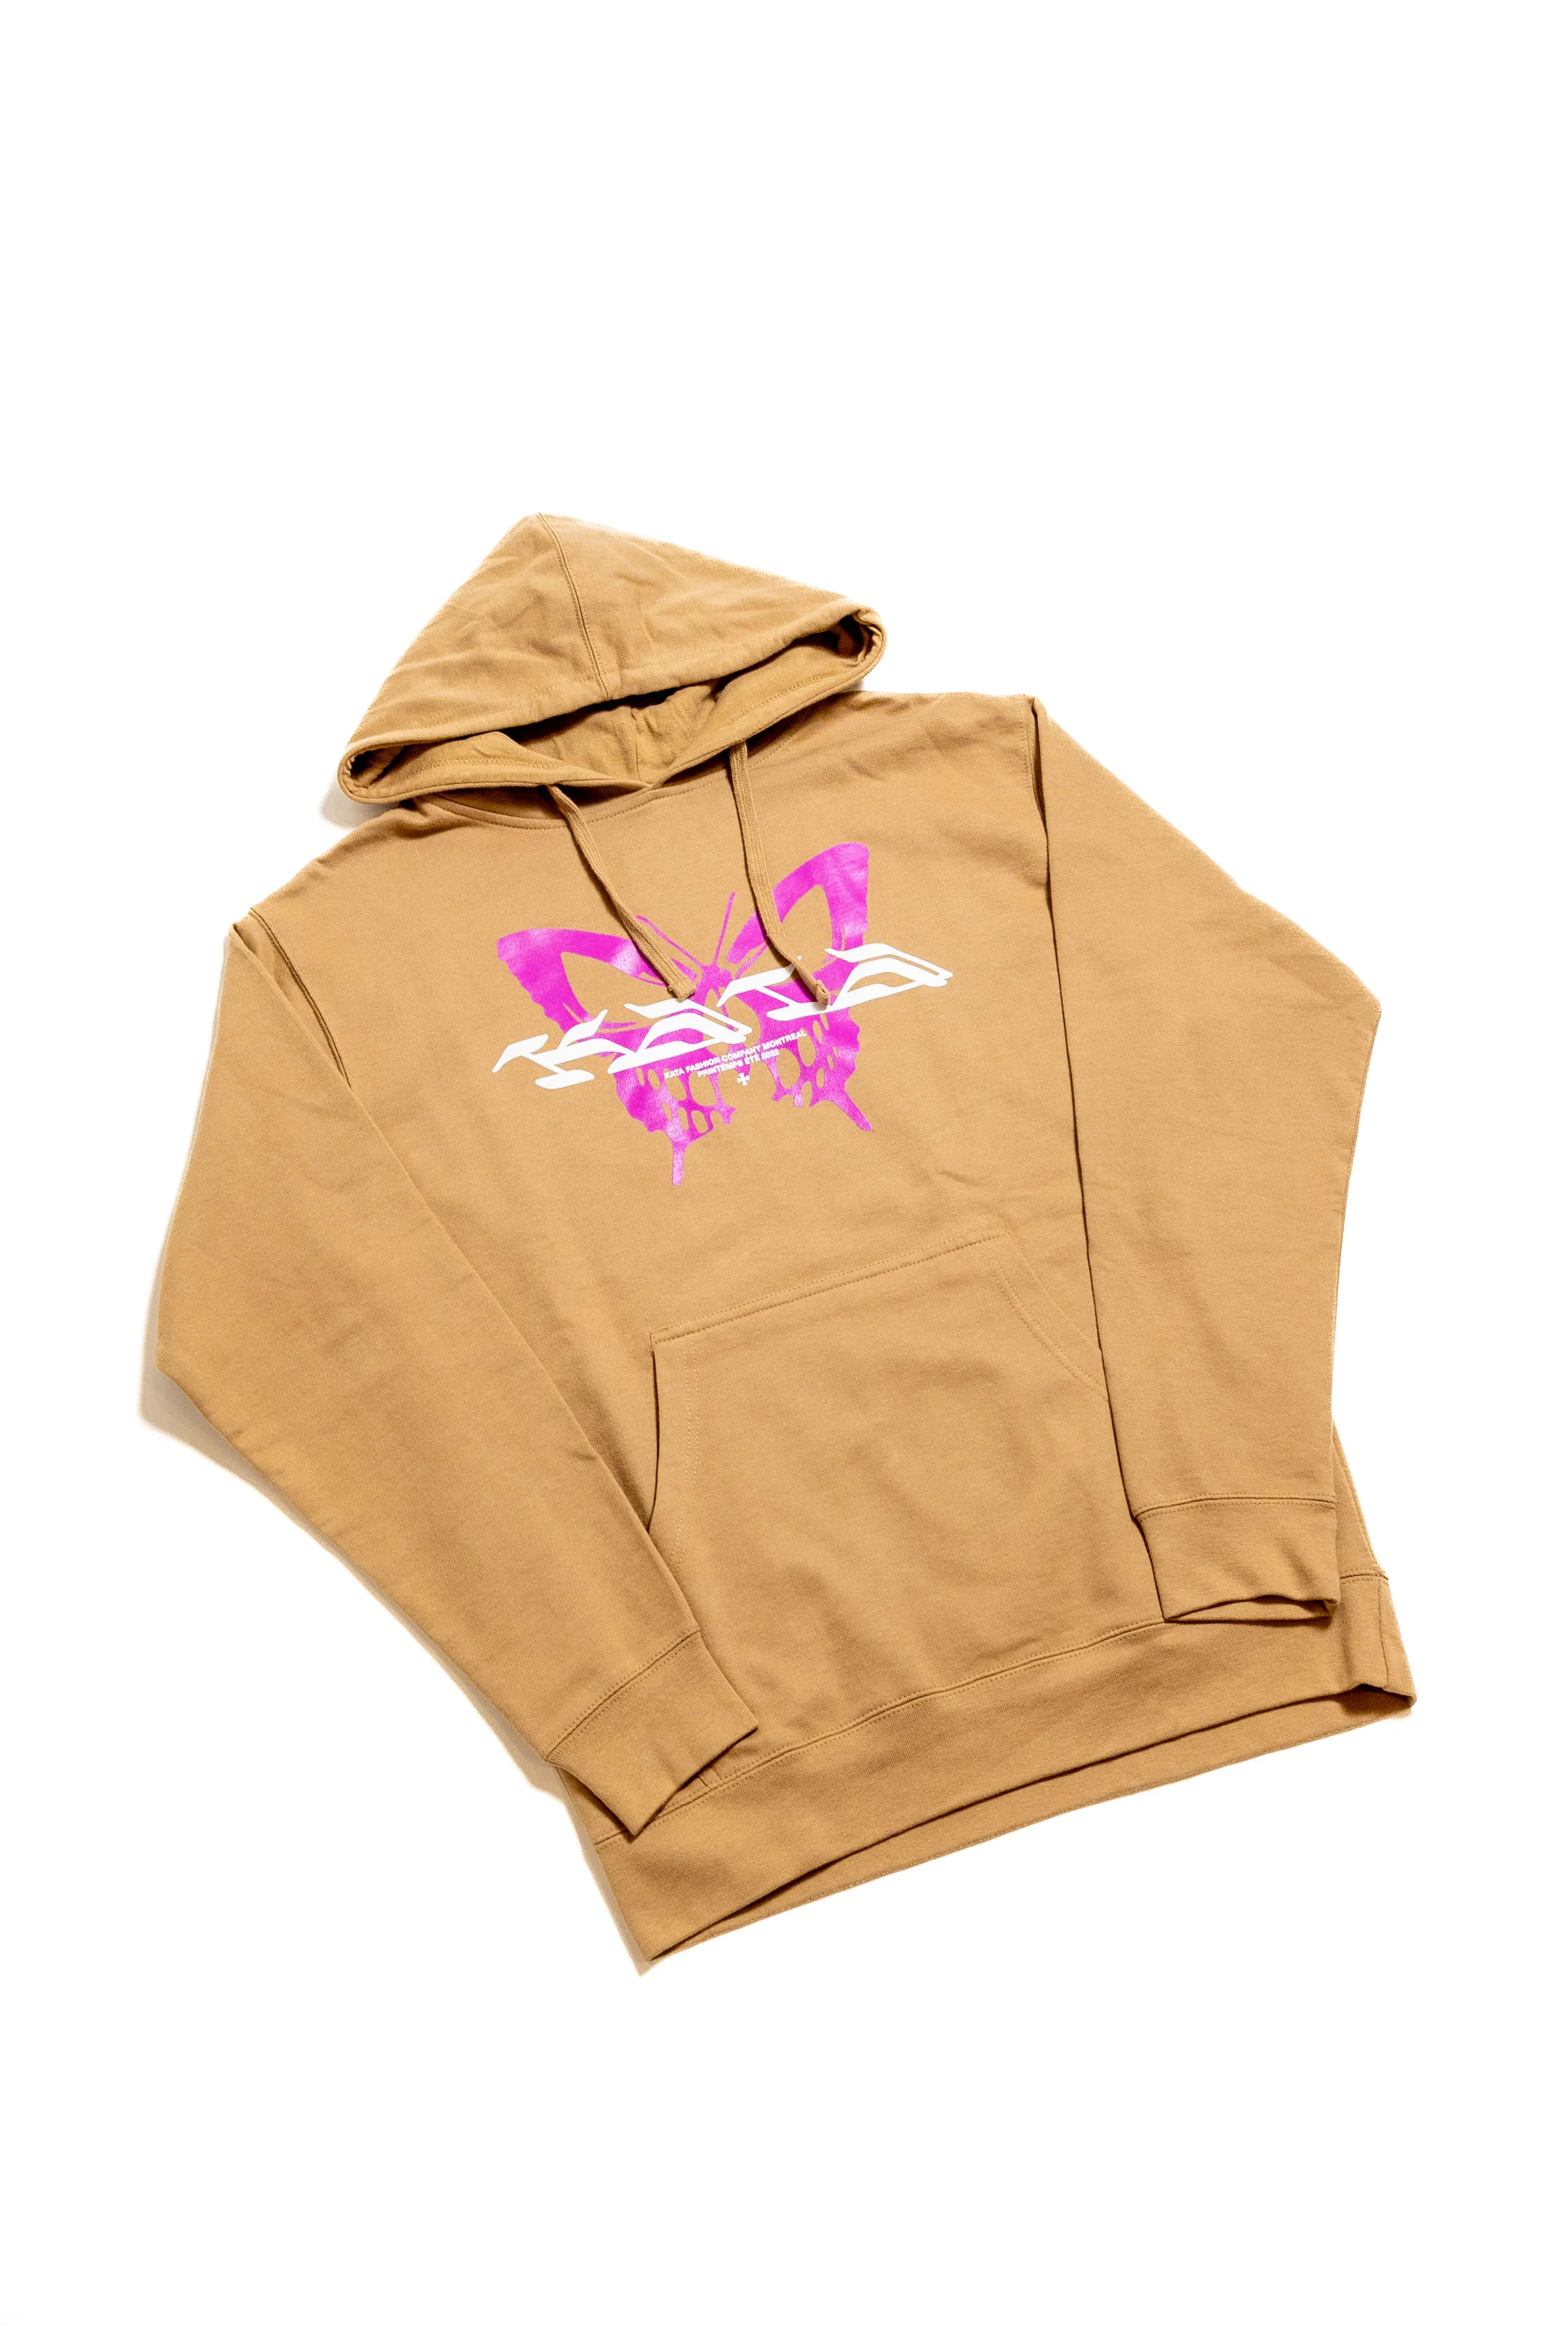 Butterfly killer Hoodie - By Kata fashion 